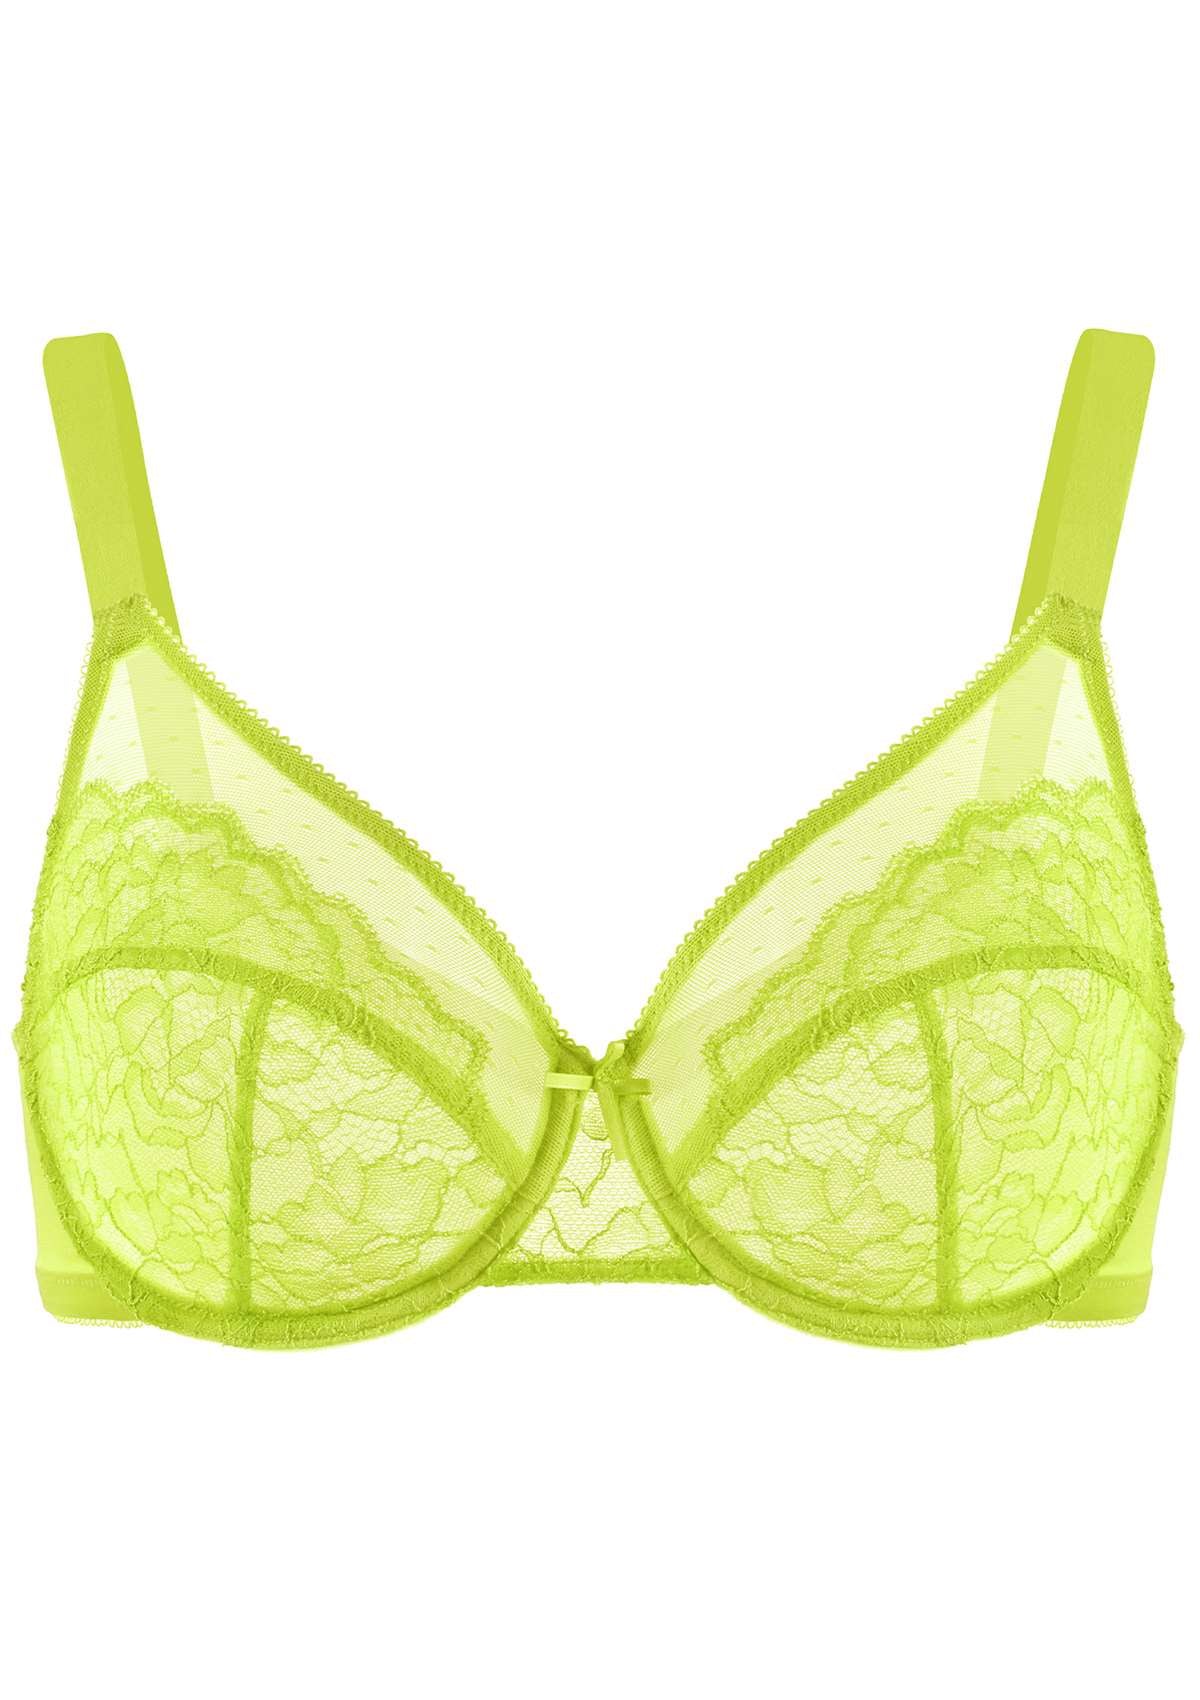 HSIA Enchante Full Cup Minimizing Bra: Supportive Unlined Lace Bra - Lime Green / 36 / DD/E